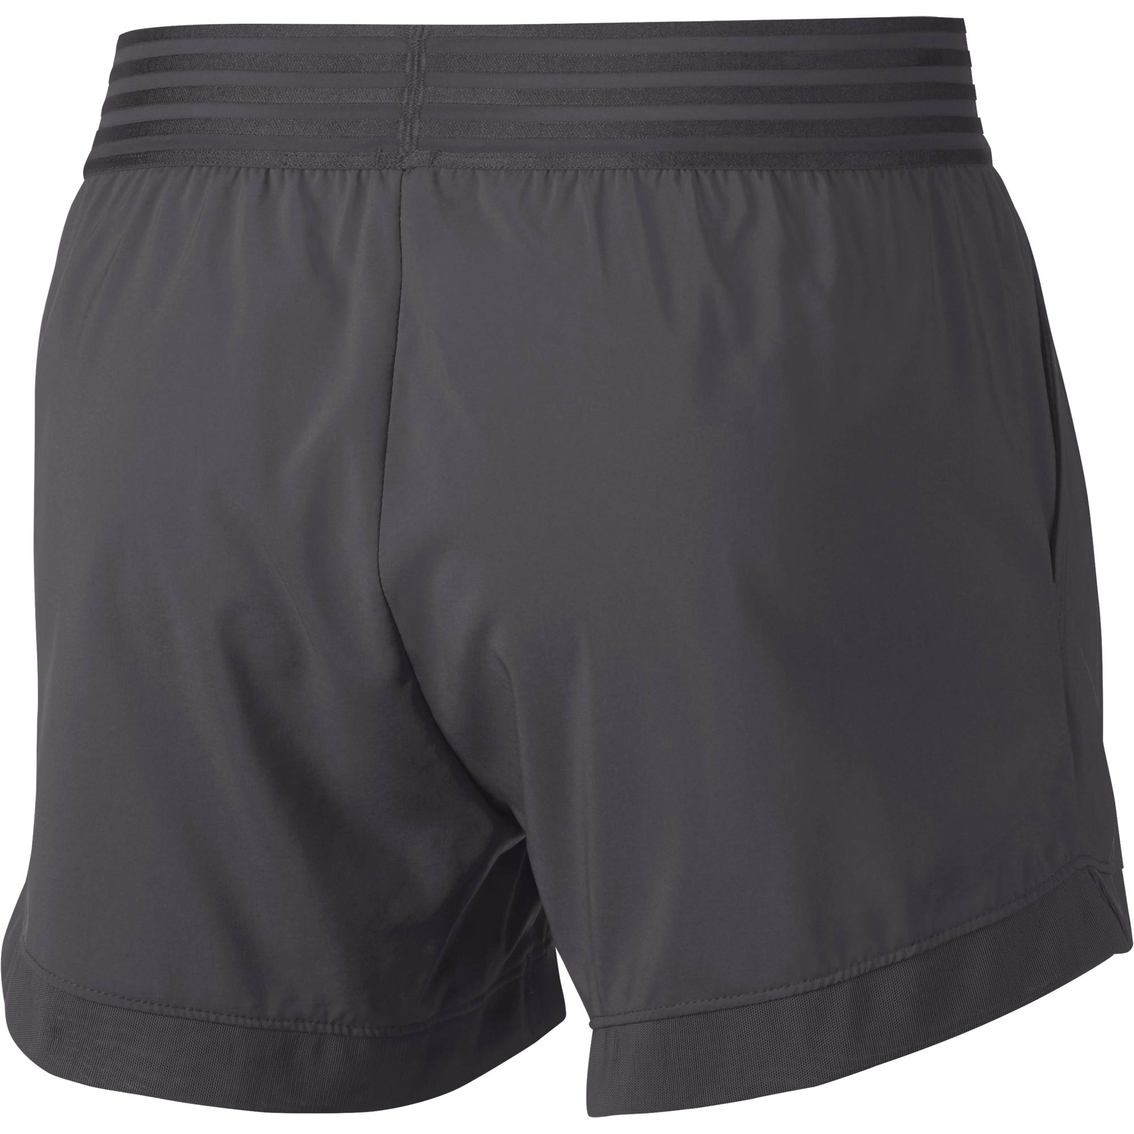 Nike  Flex 4 in. Shorts - Image 2 of 3